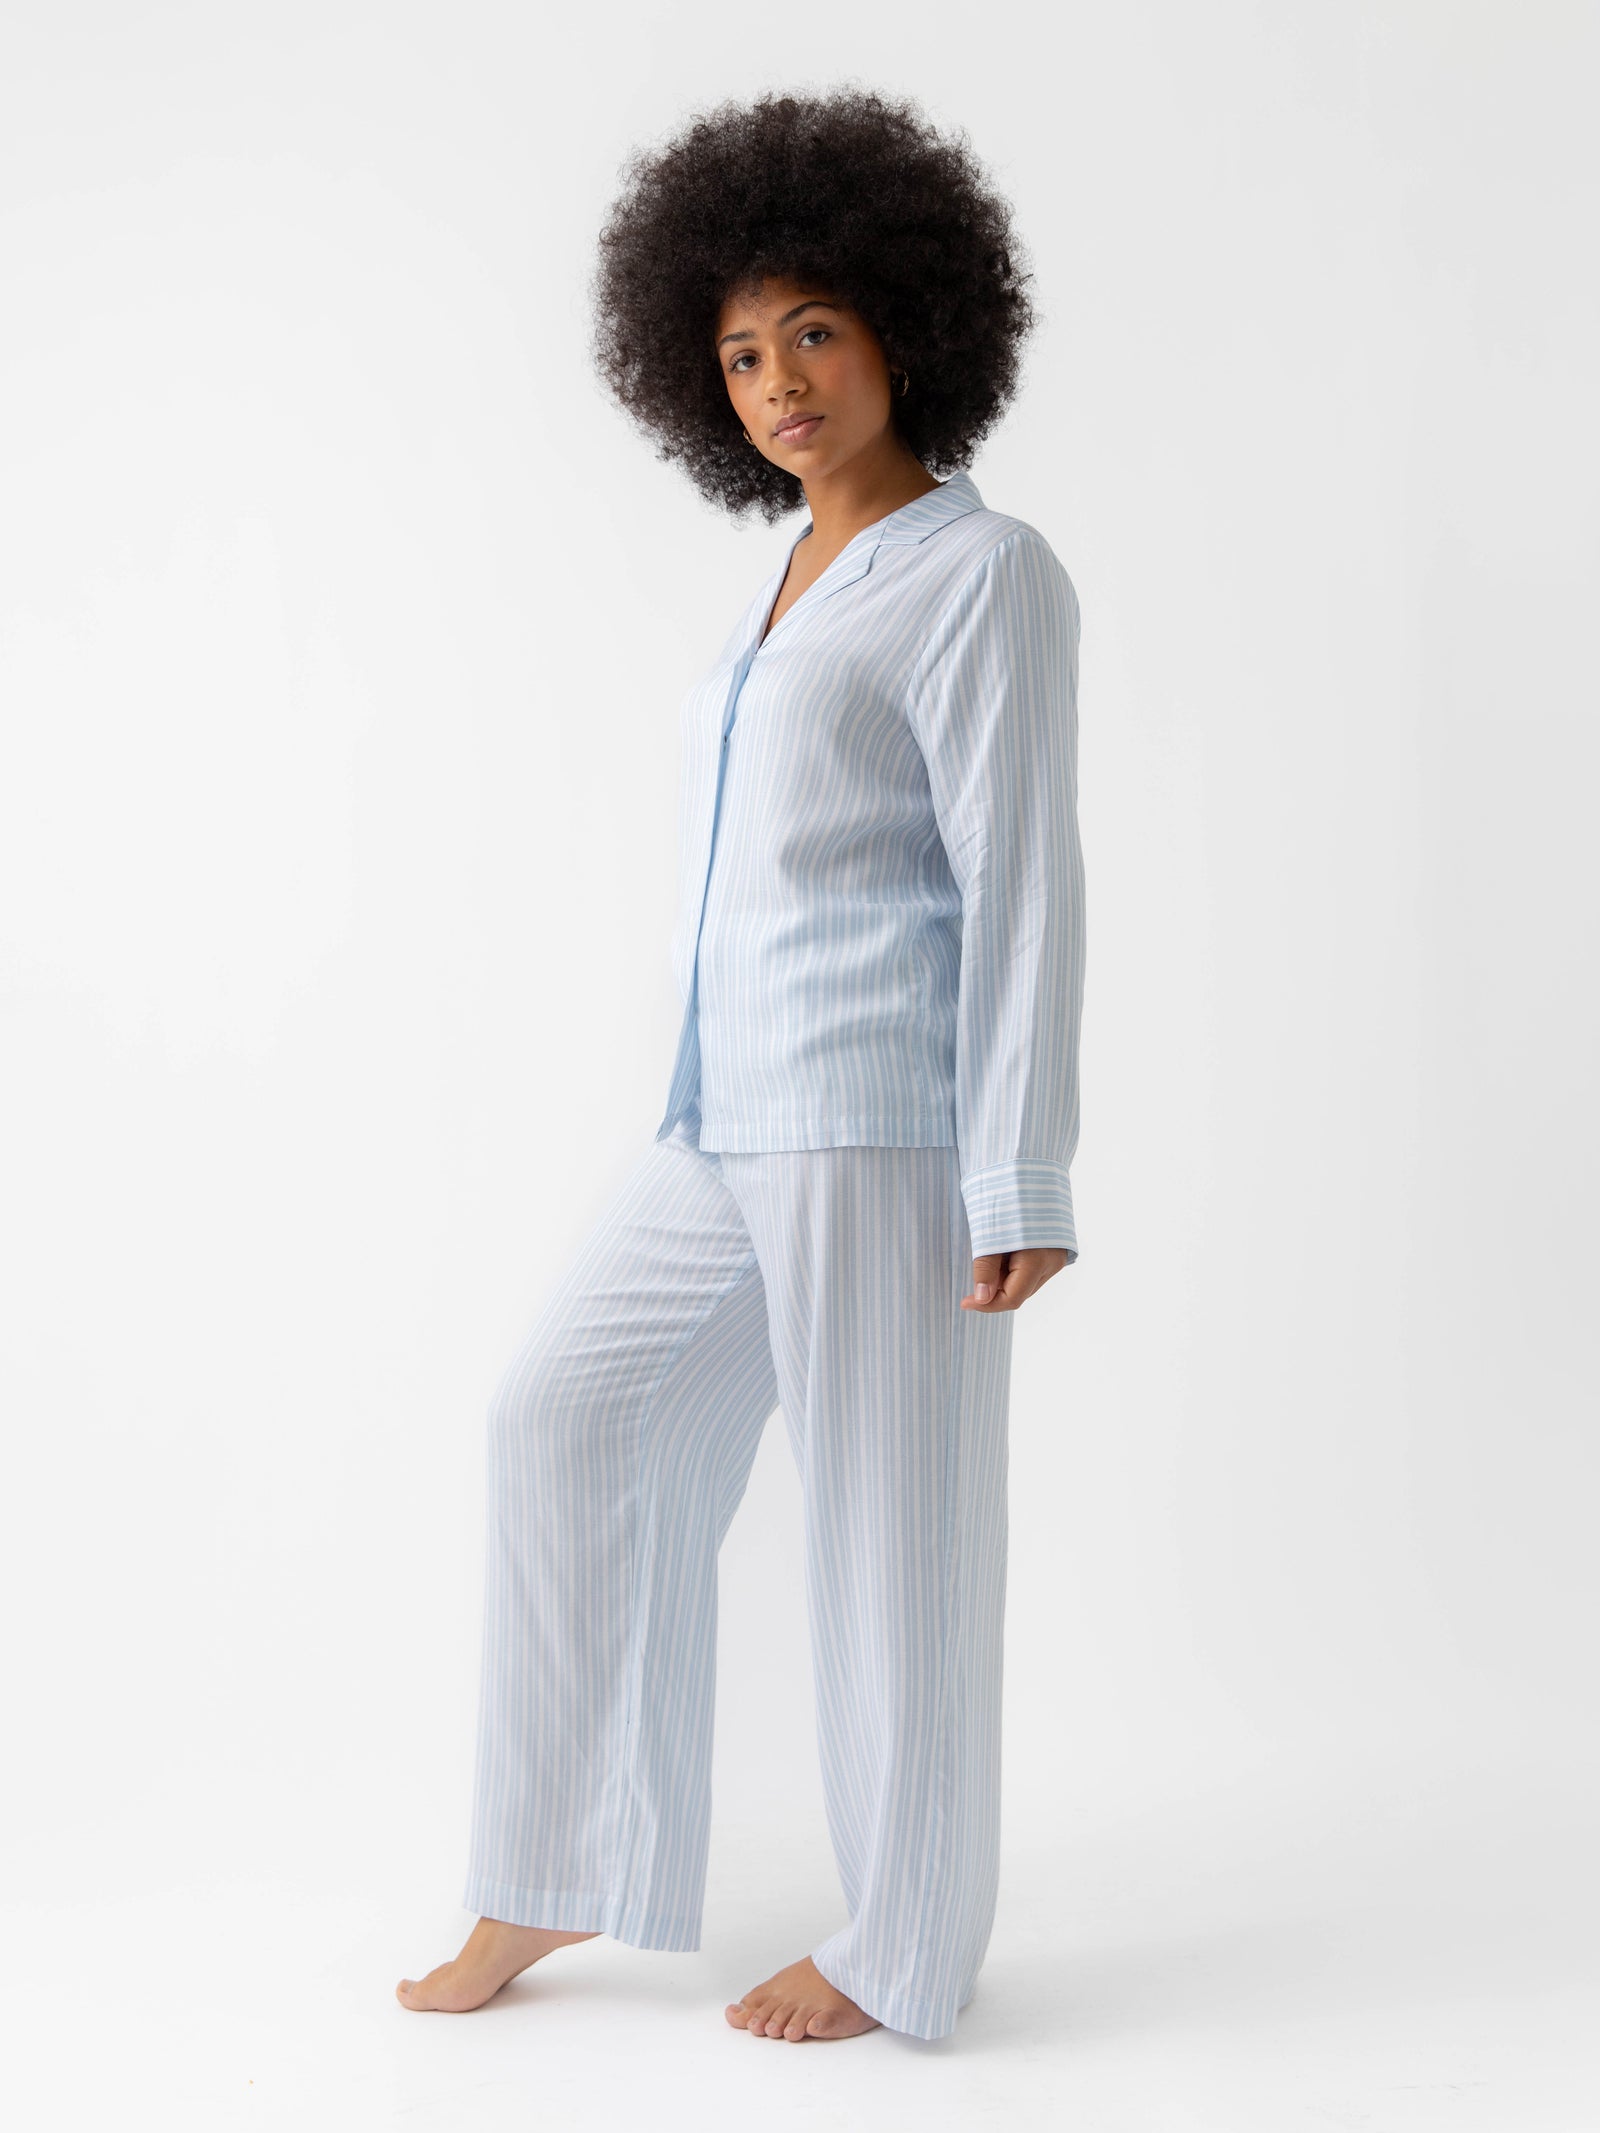 Woman wearing Spring Blue Stripe soft woven pajamas with white background 